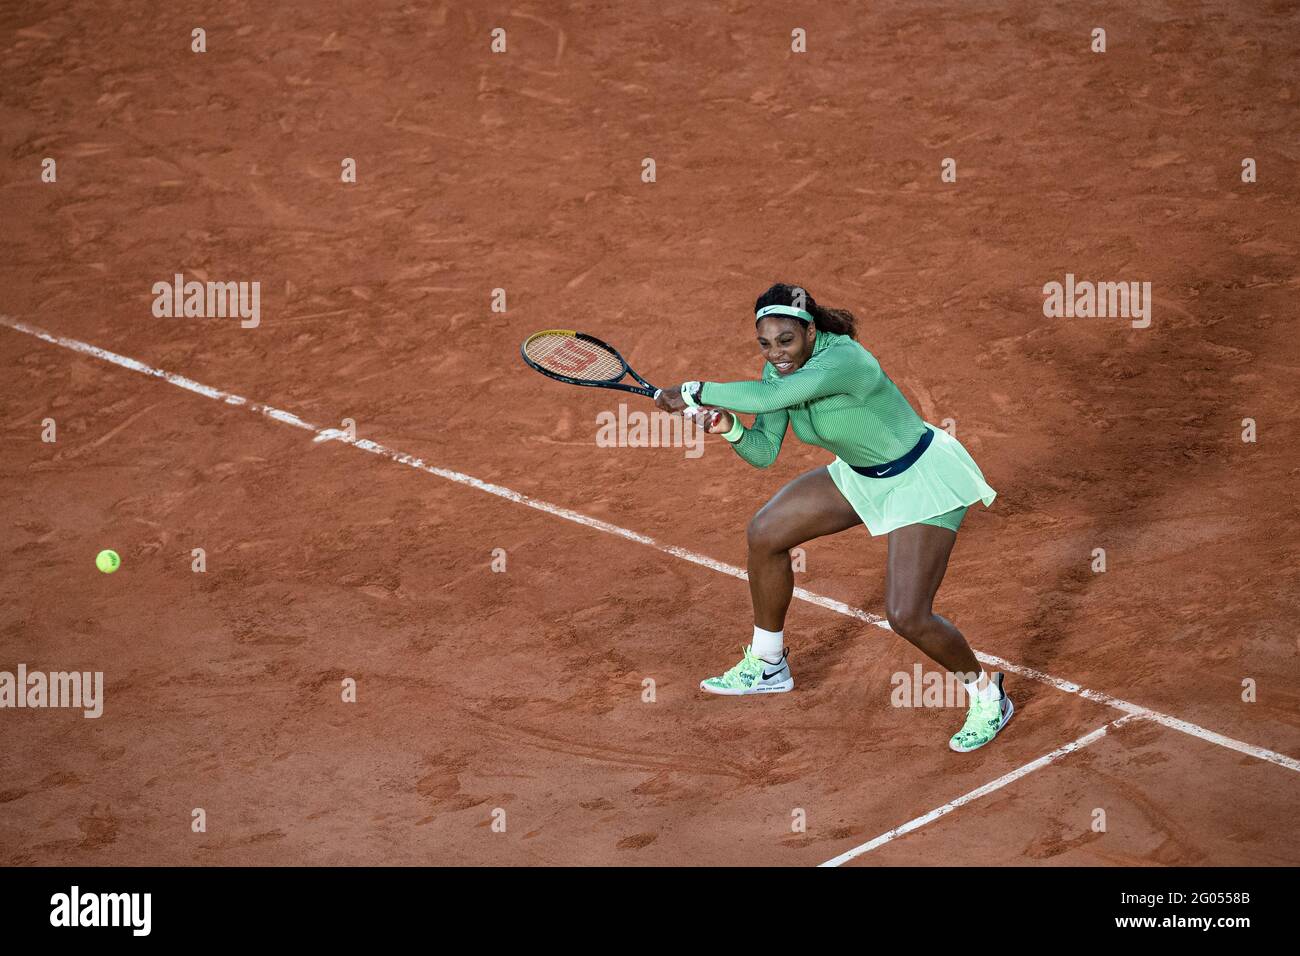 Paris, France. 31st May, 2021. Serena Williams of the United States returns the ball during the women's first round match against Irina-Camelia Begu of Romania at the French Open tennis tournament at Roland Garros in Paris, France, May 31, 2021. Credit: Aurelien Morissard/Xinhua/Alamy Live News Stock Photo